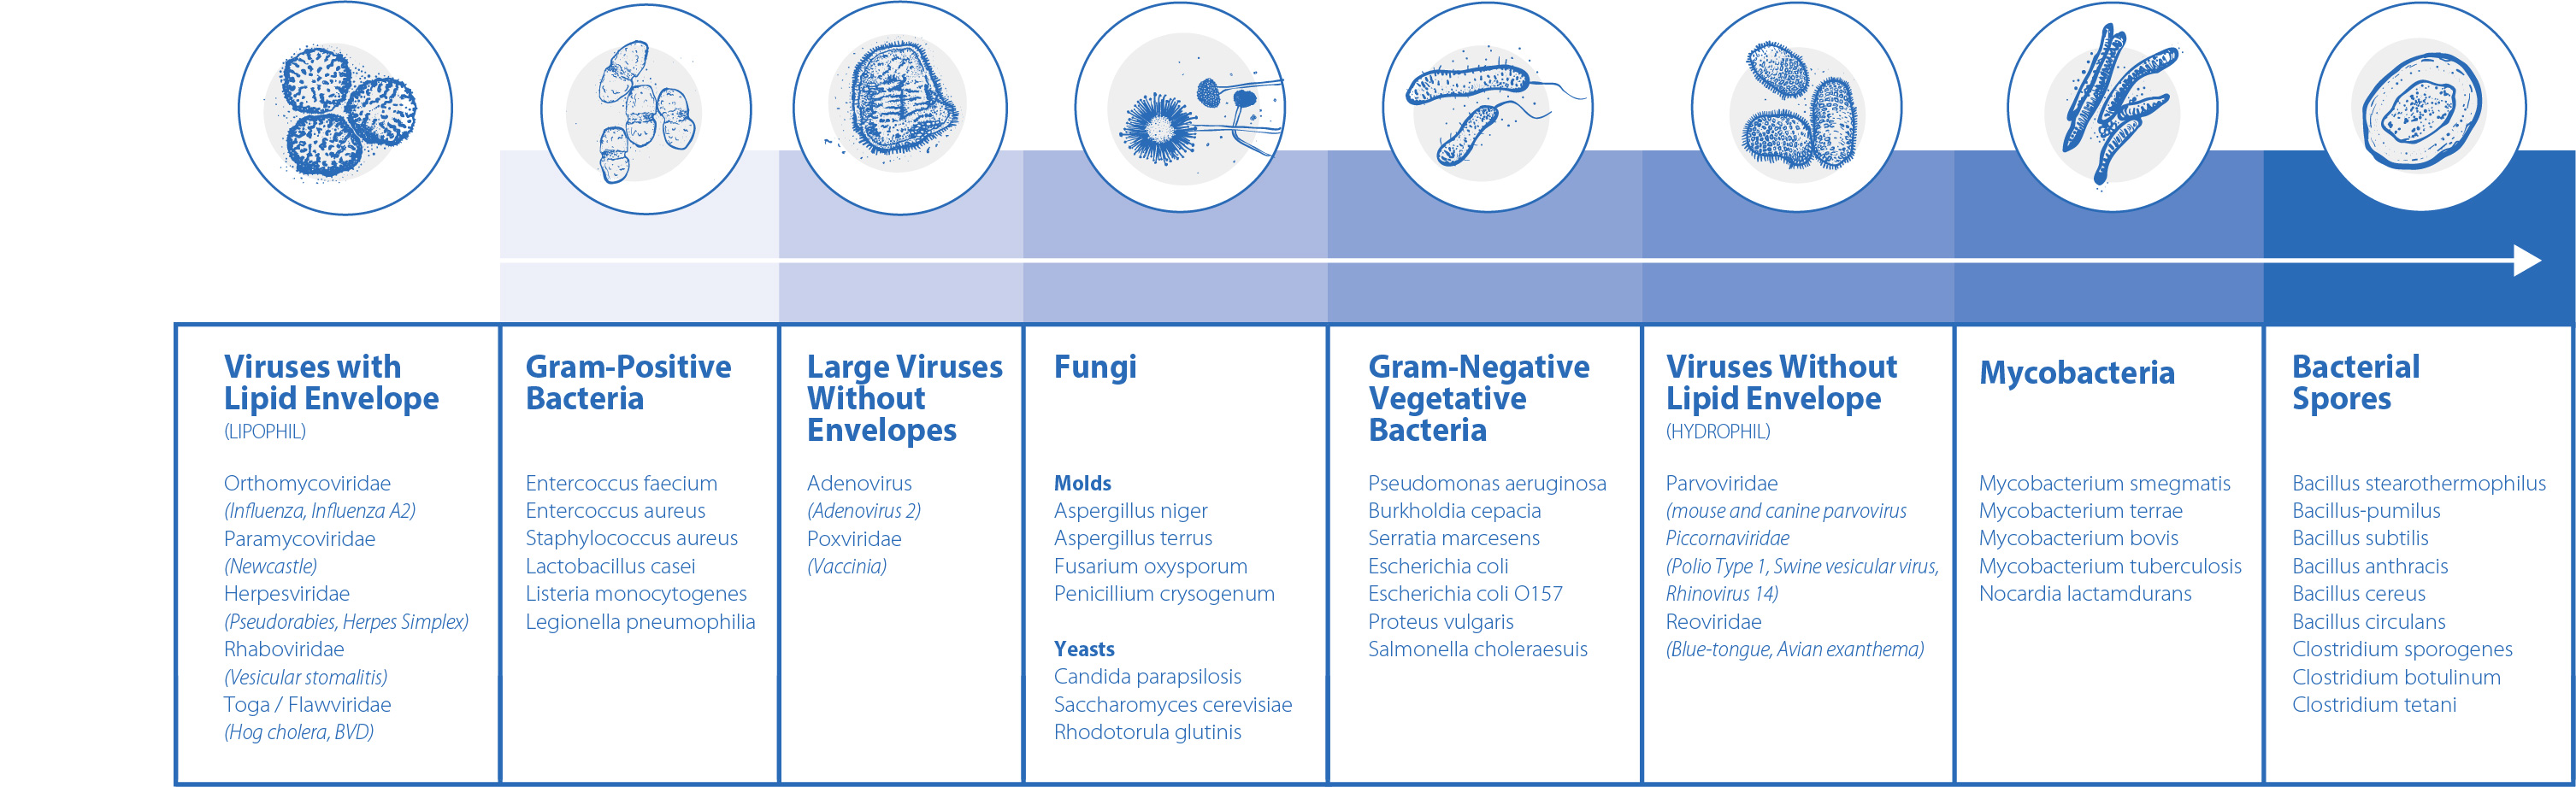 Graphical representation of: Viruses with lipid envelope, Gram positive bacteria, Large viruses without envelope, Fungi, Gram negative vegetative bacteria, Viruses without lipid envelope, Mycobacteria and Bacterial spores.